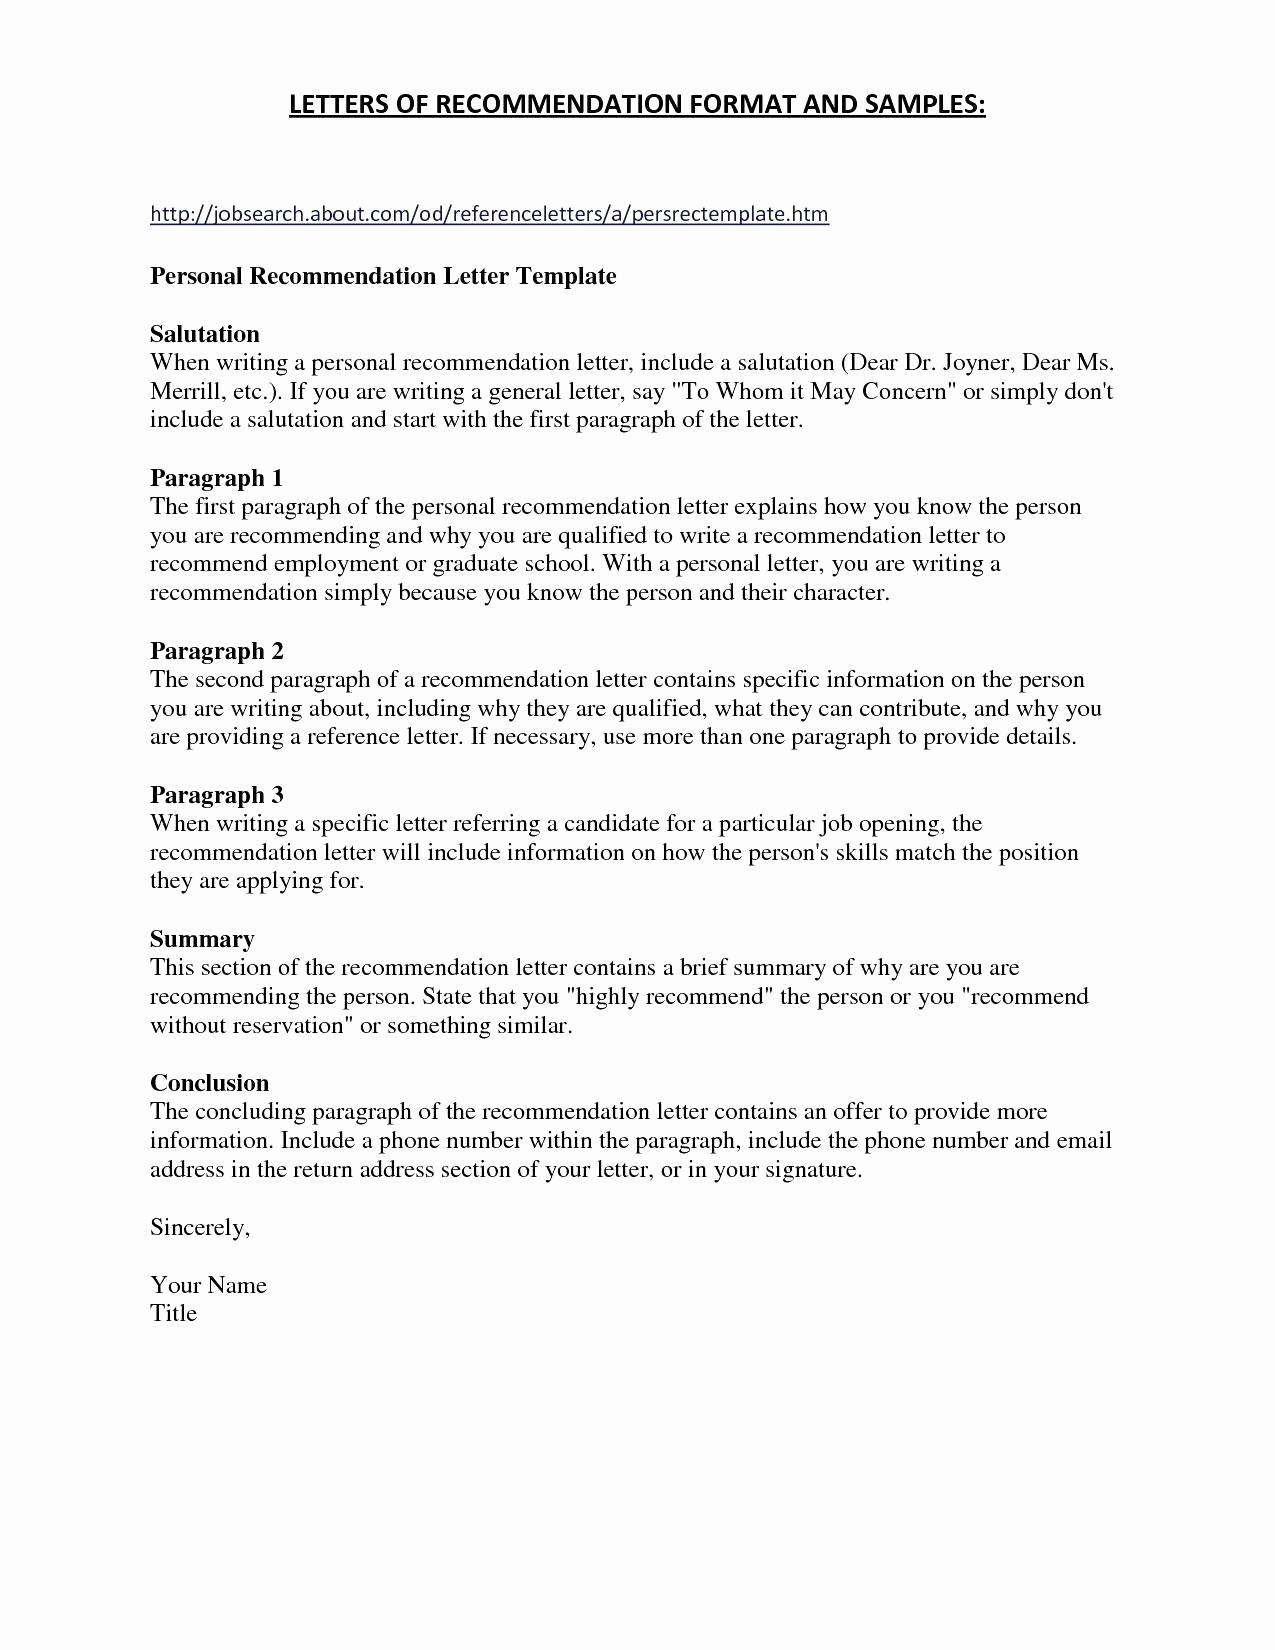 Insurance Referral Letter Template - Thank You Letter Template Jossgarman Jossgarman